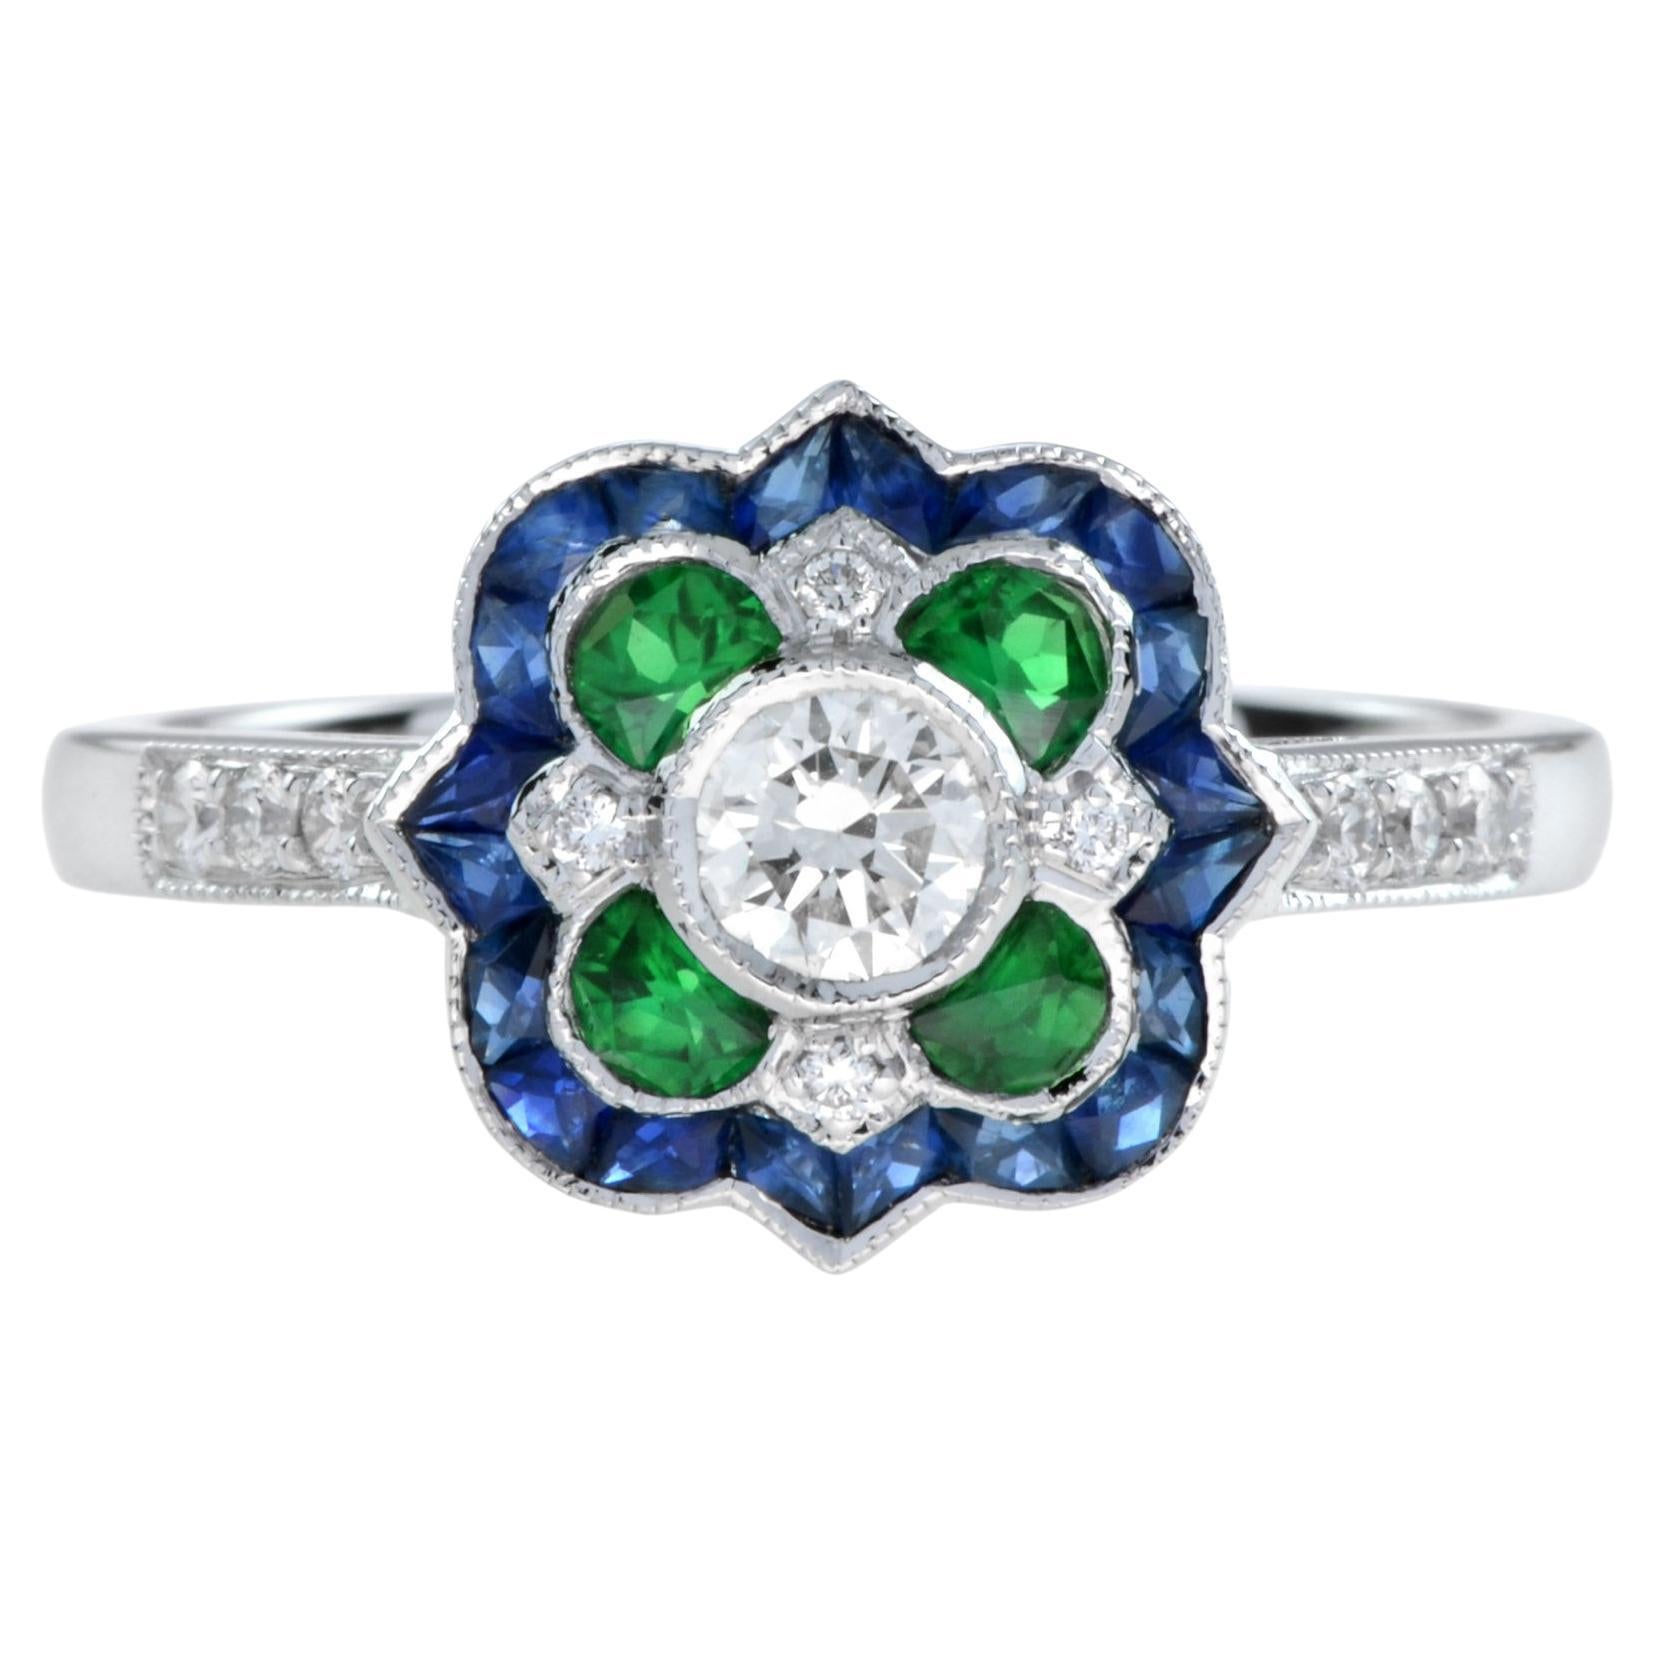 Art Deco Style Diamond with Emerald and Sapphire Ring in 18K White Gold